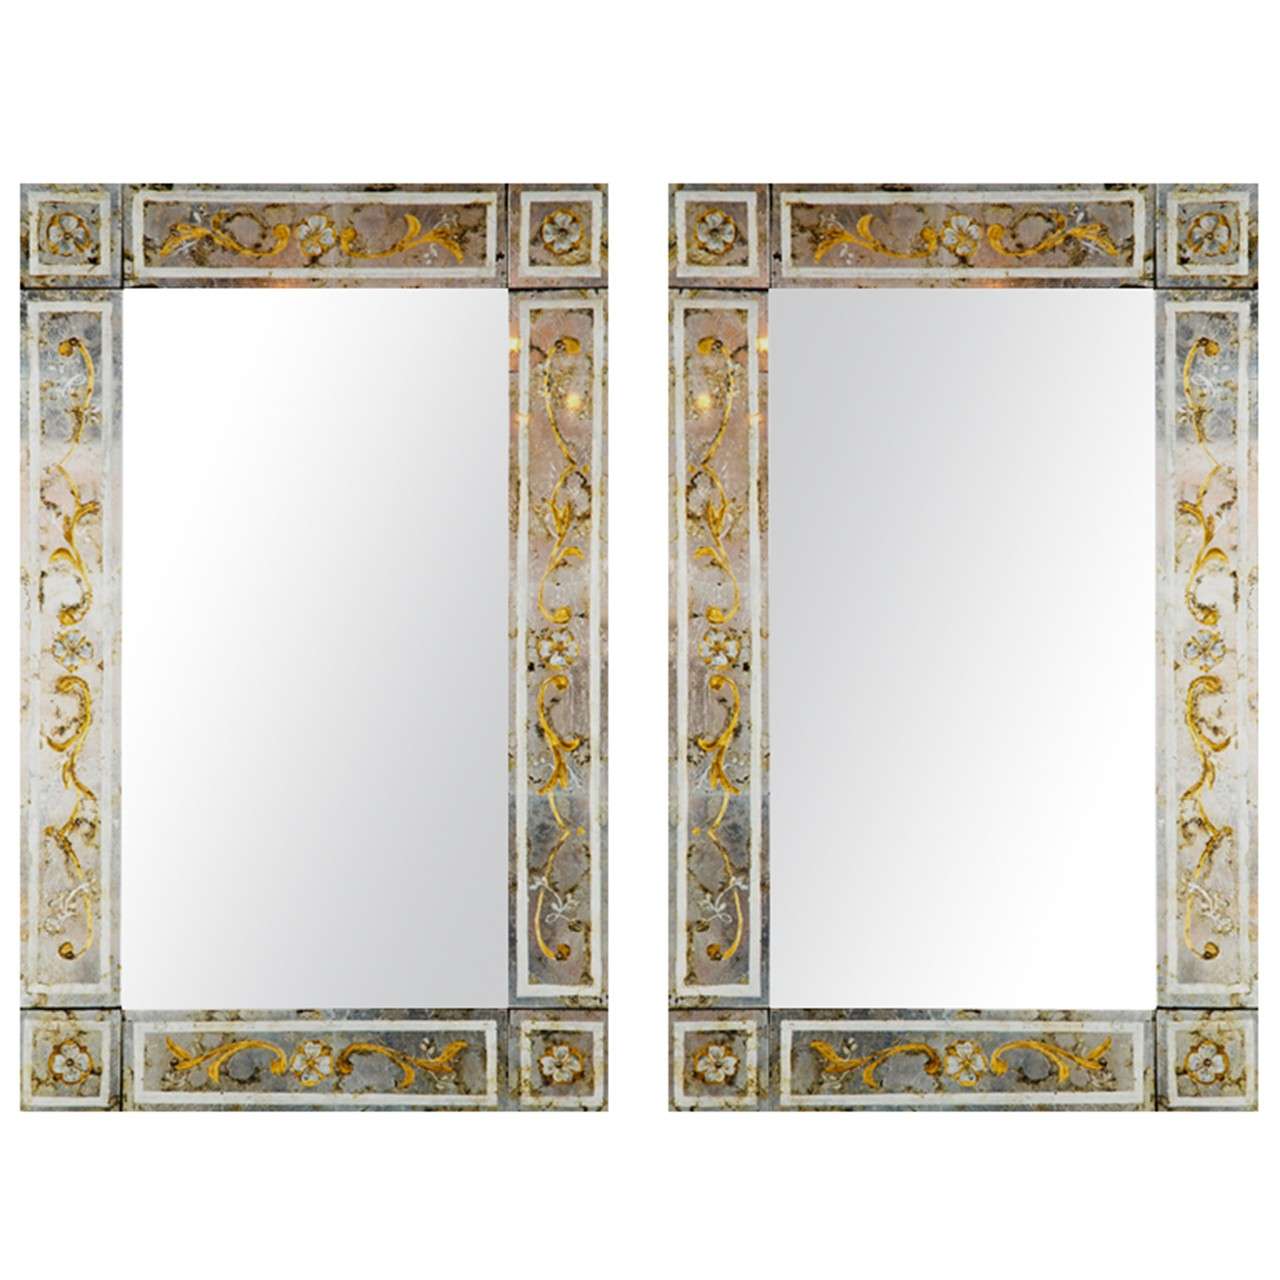 Pair of Reverse Painted Glass Mirrors attri. to Jansen